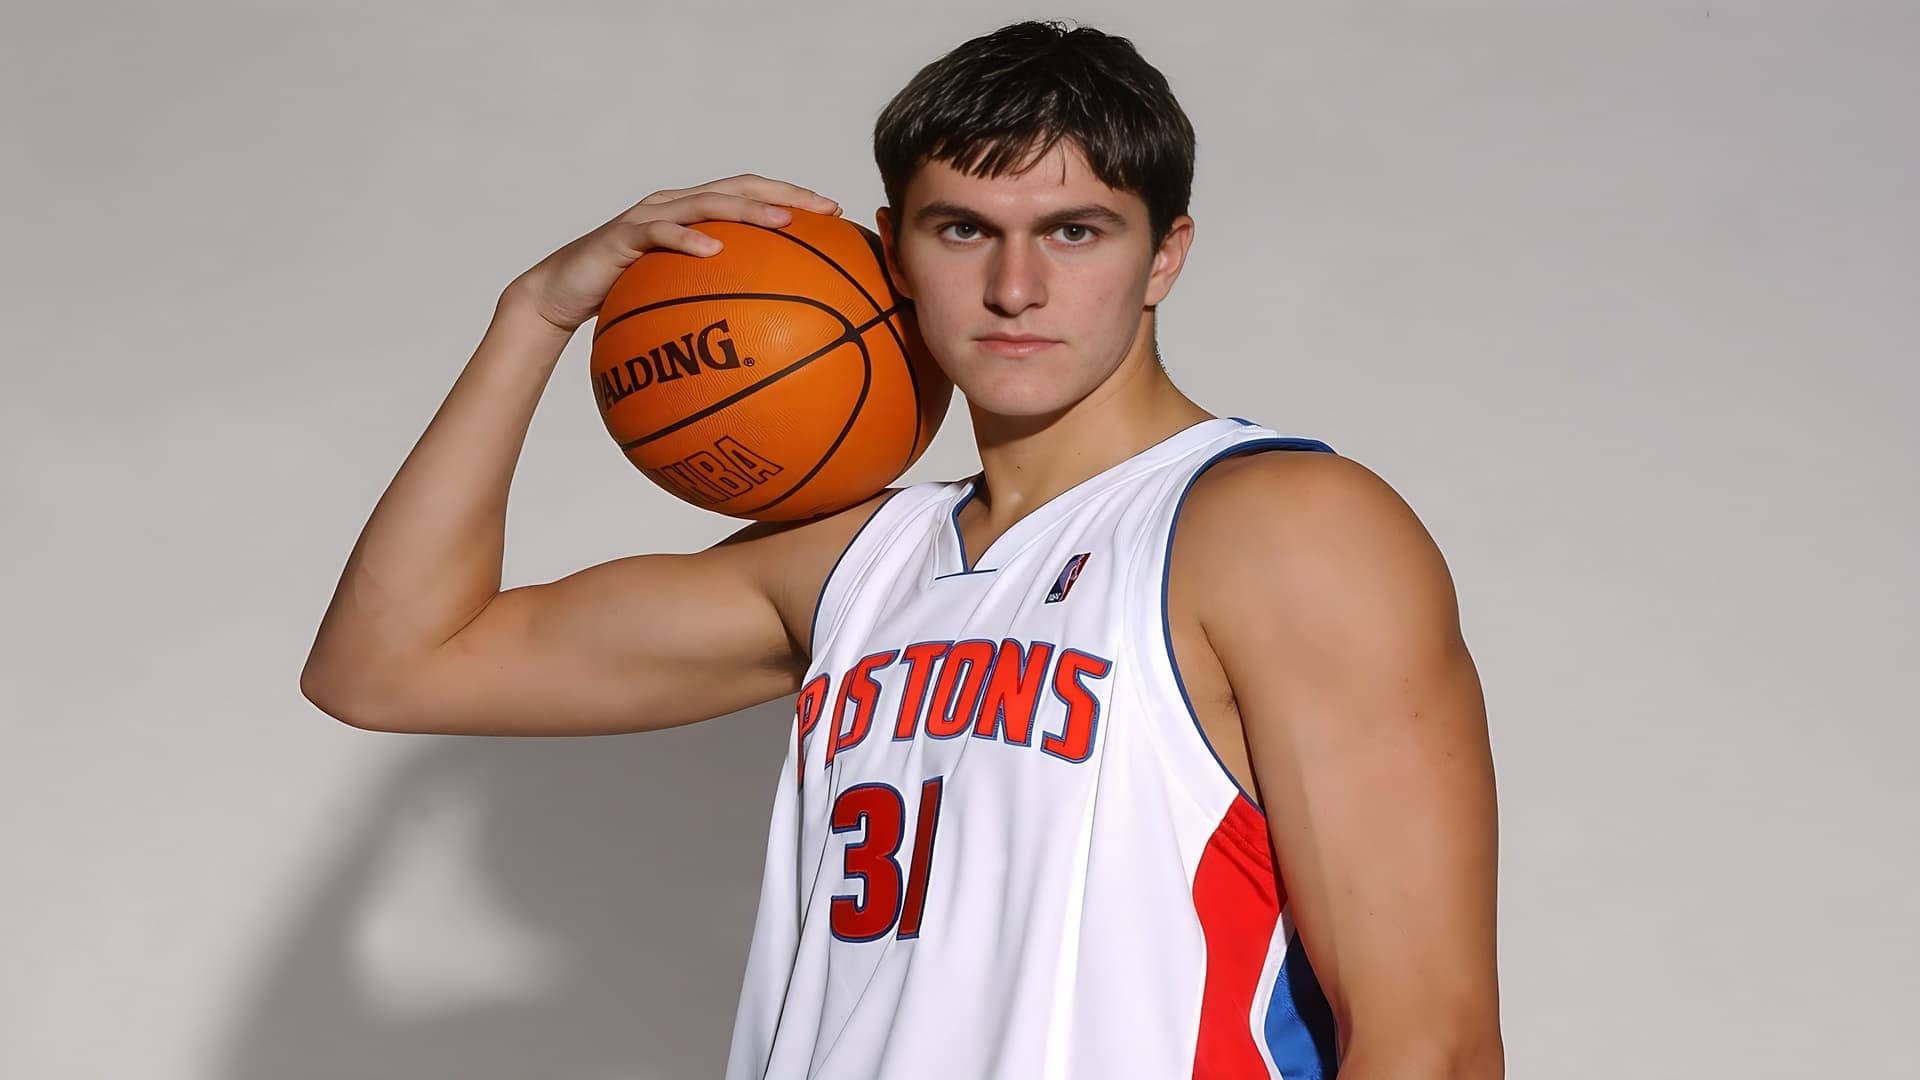 The youngest player to win an NBA championship of all time - Darko Milicic